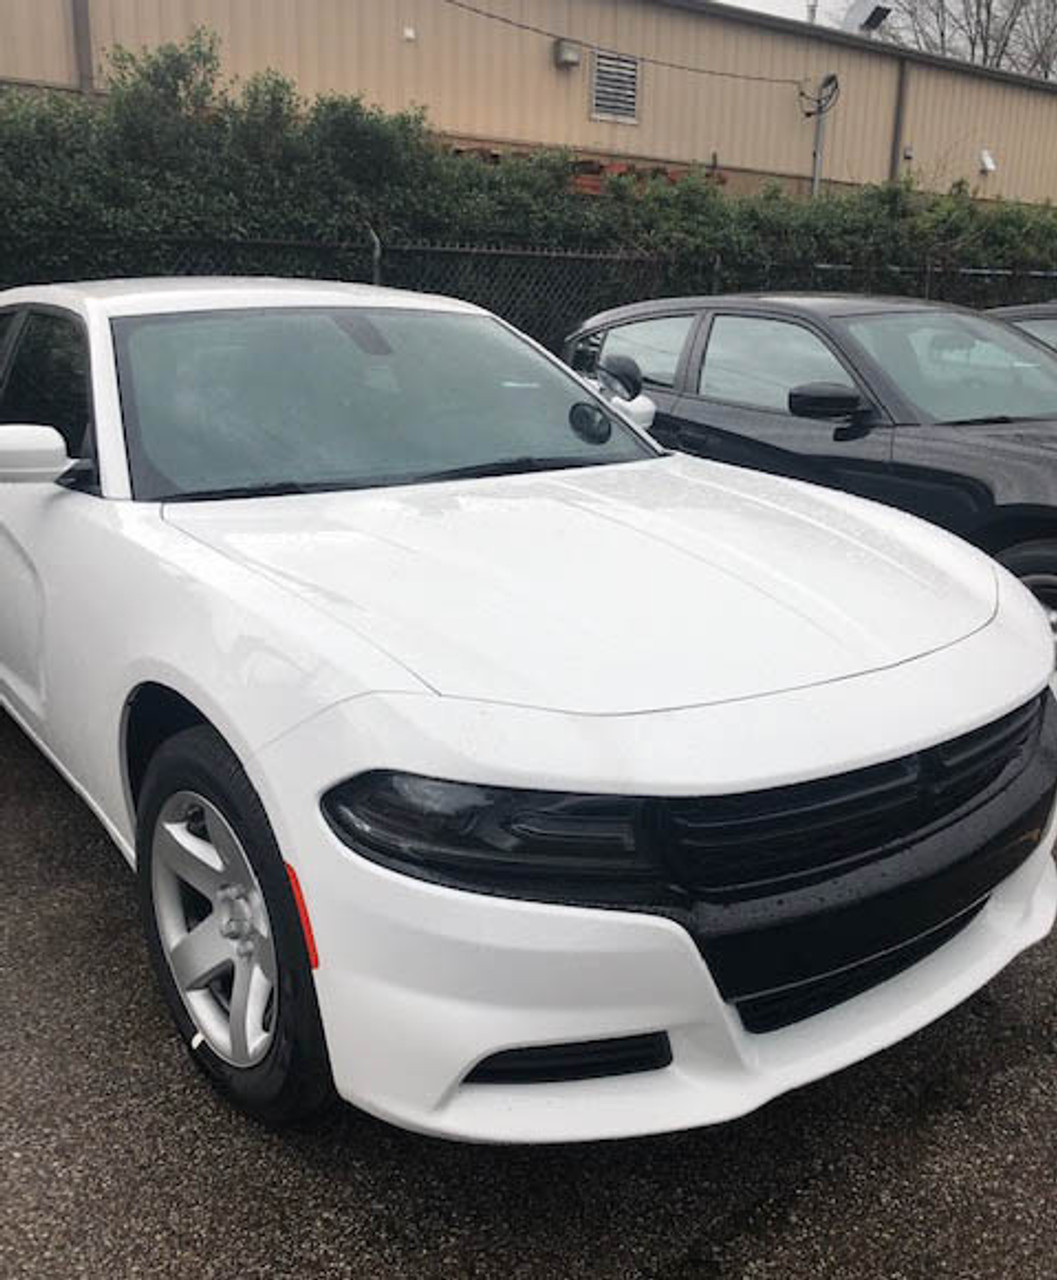 New 2023 White Dodge Charger PPV V8 RWD ready to be built as a Marked Patrol Package Police Pursuit Car (Emergency Lighting, Siren, Controller, Partition, Window Bars, etc.), + Delivery